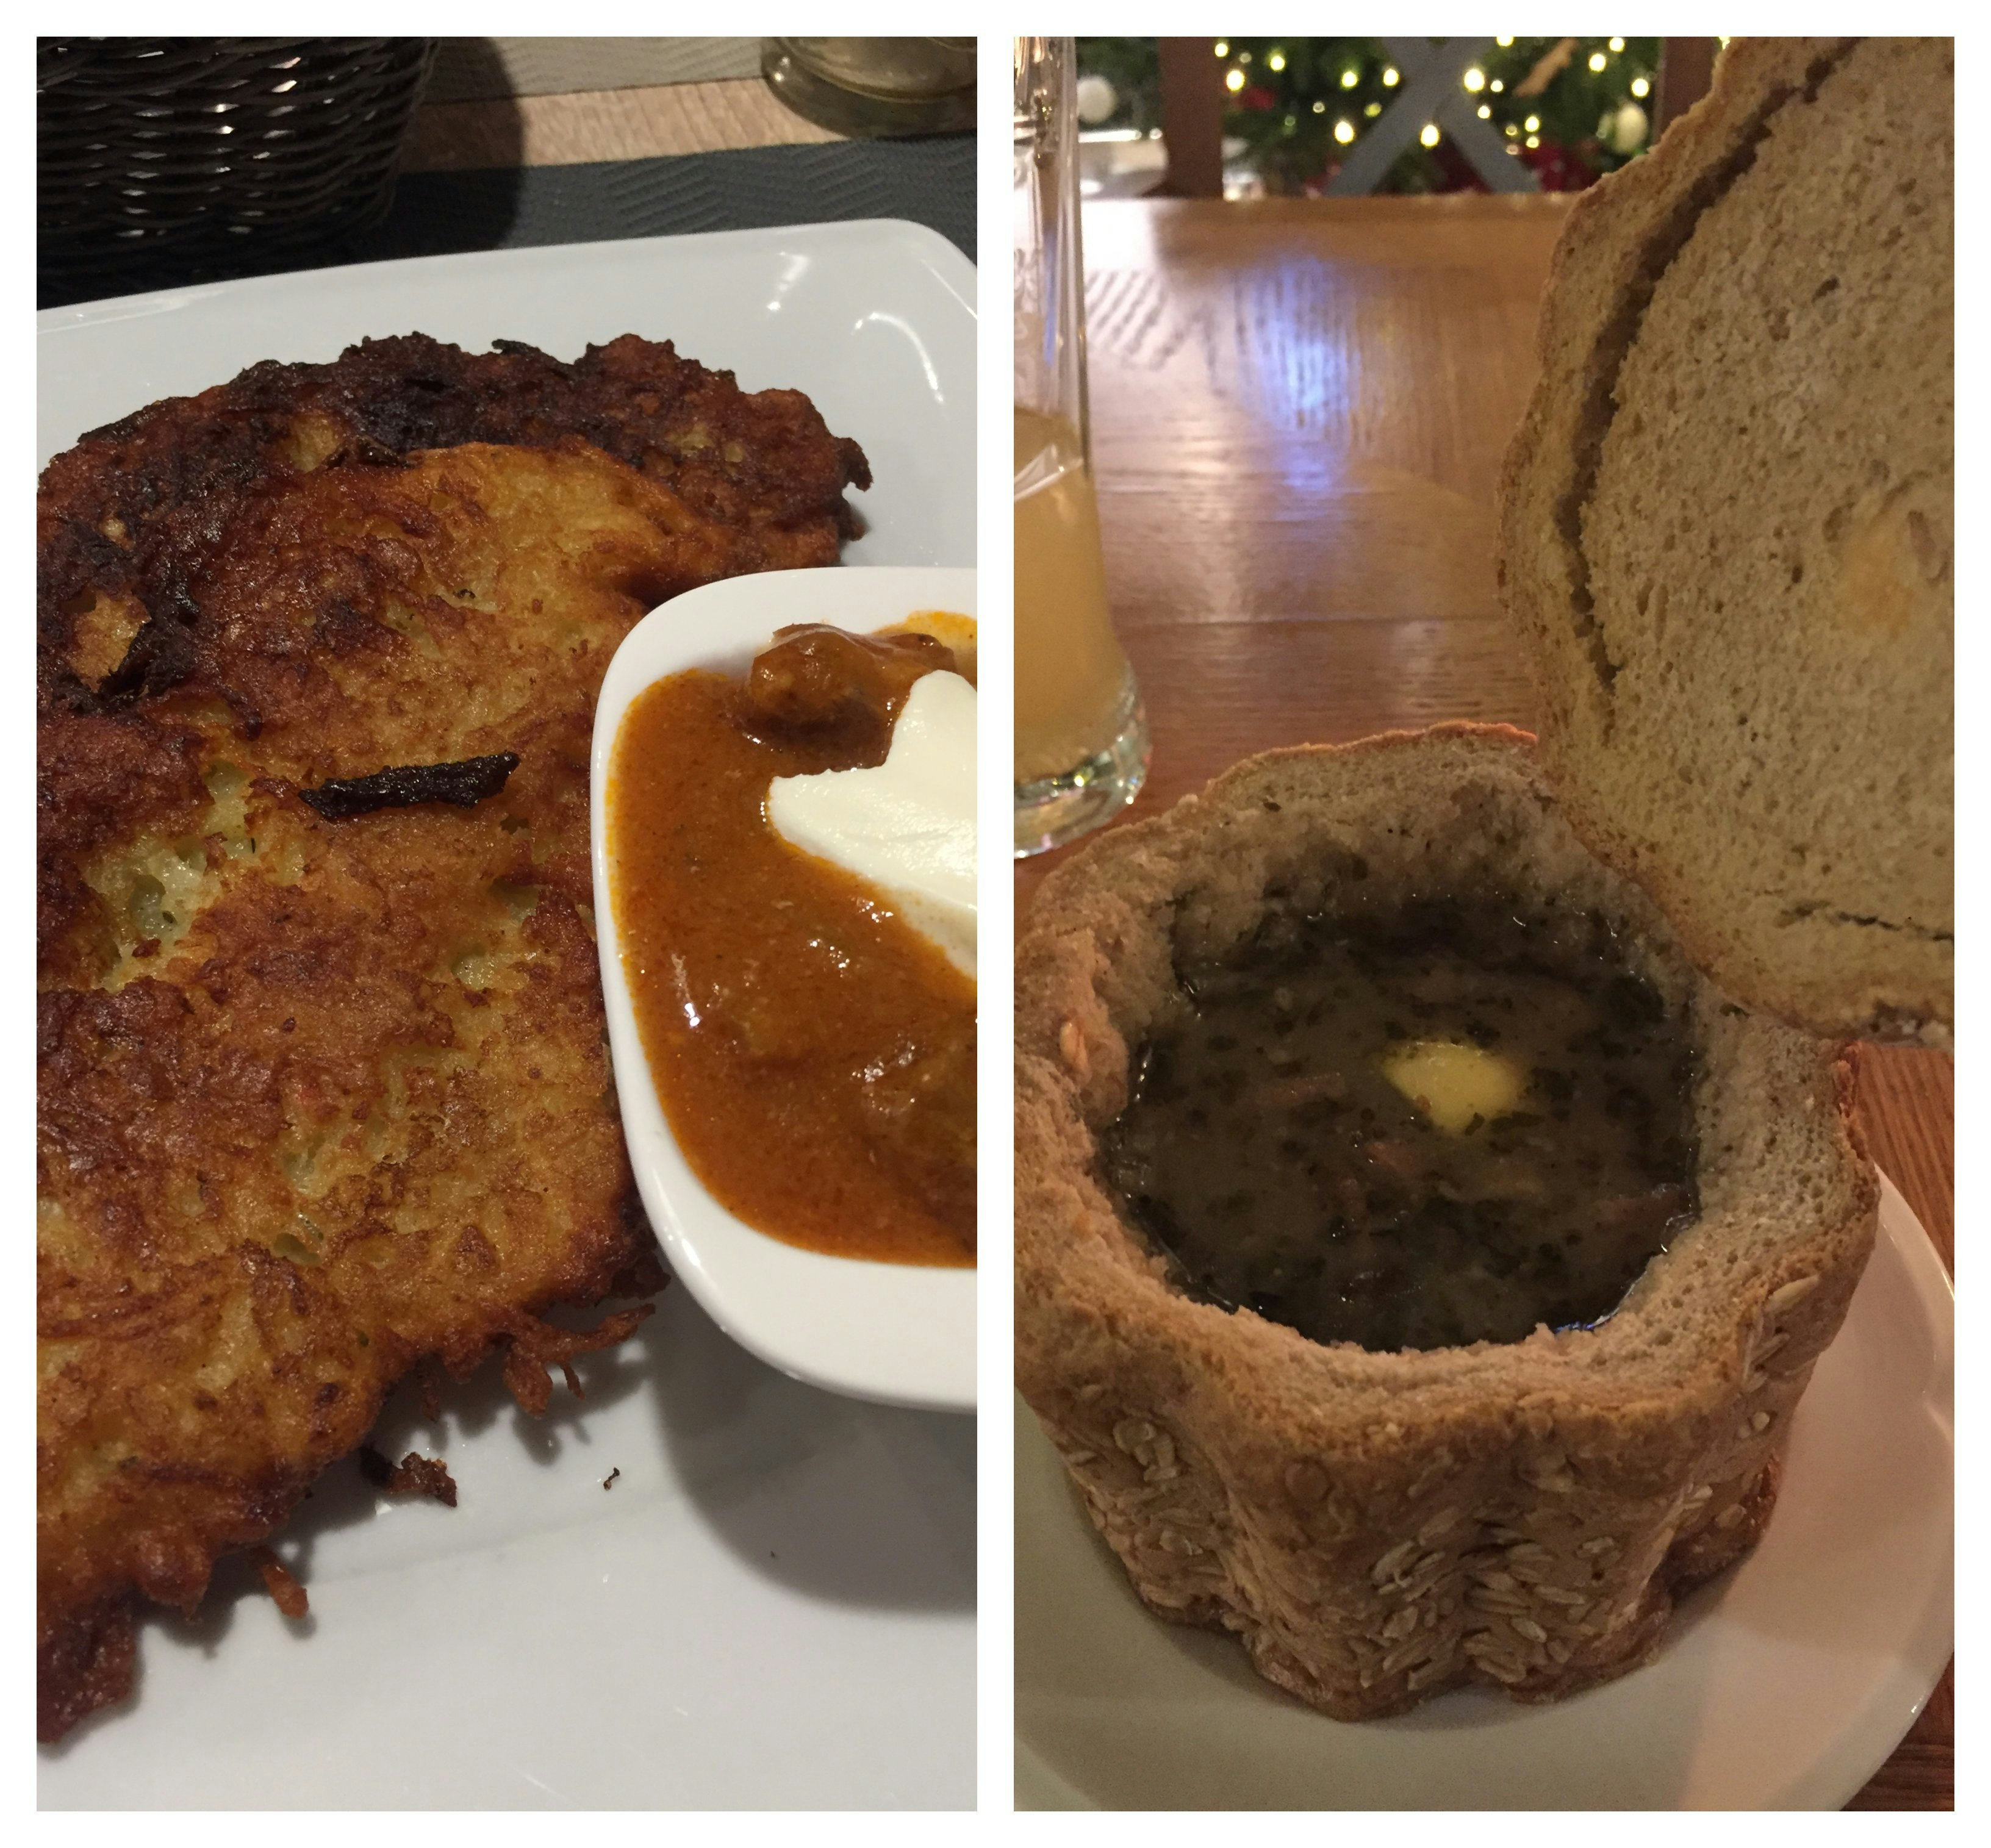 On the left are fried potato pancakes and a red goulash with sour cream on top. On the right, an open bread bowl of soup